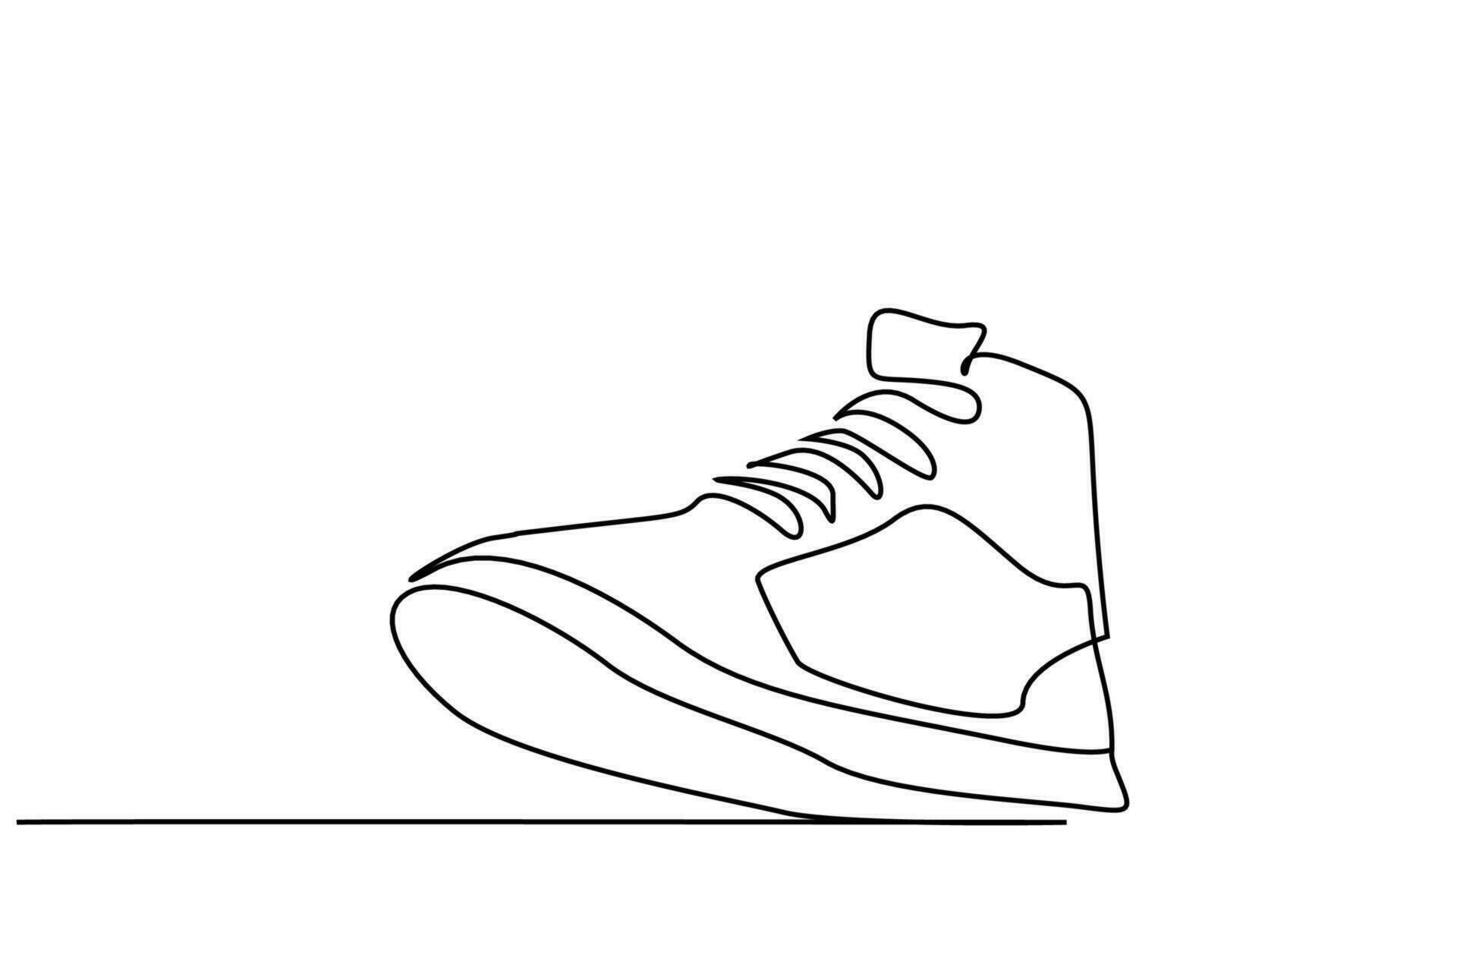 new fashion sports sneakers casual shoes line art design vector